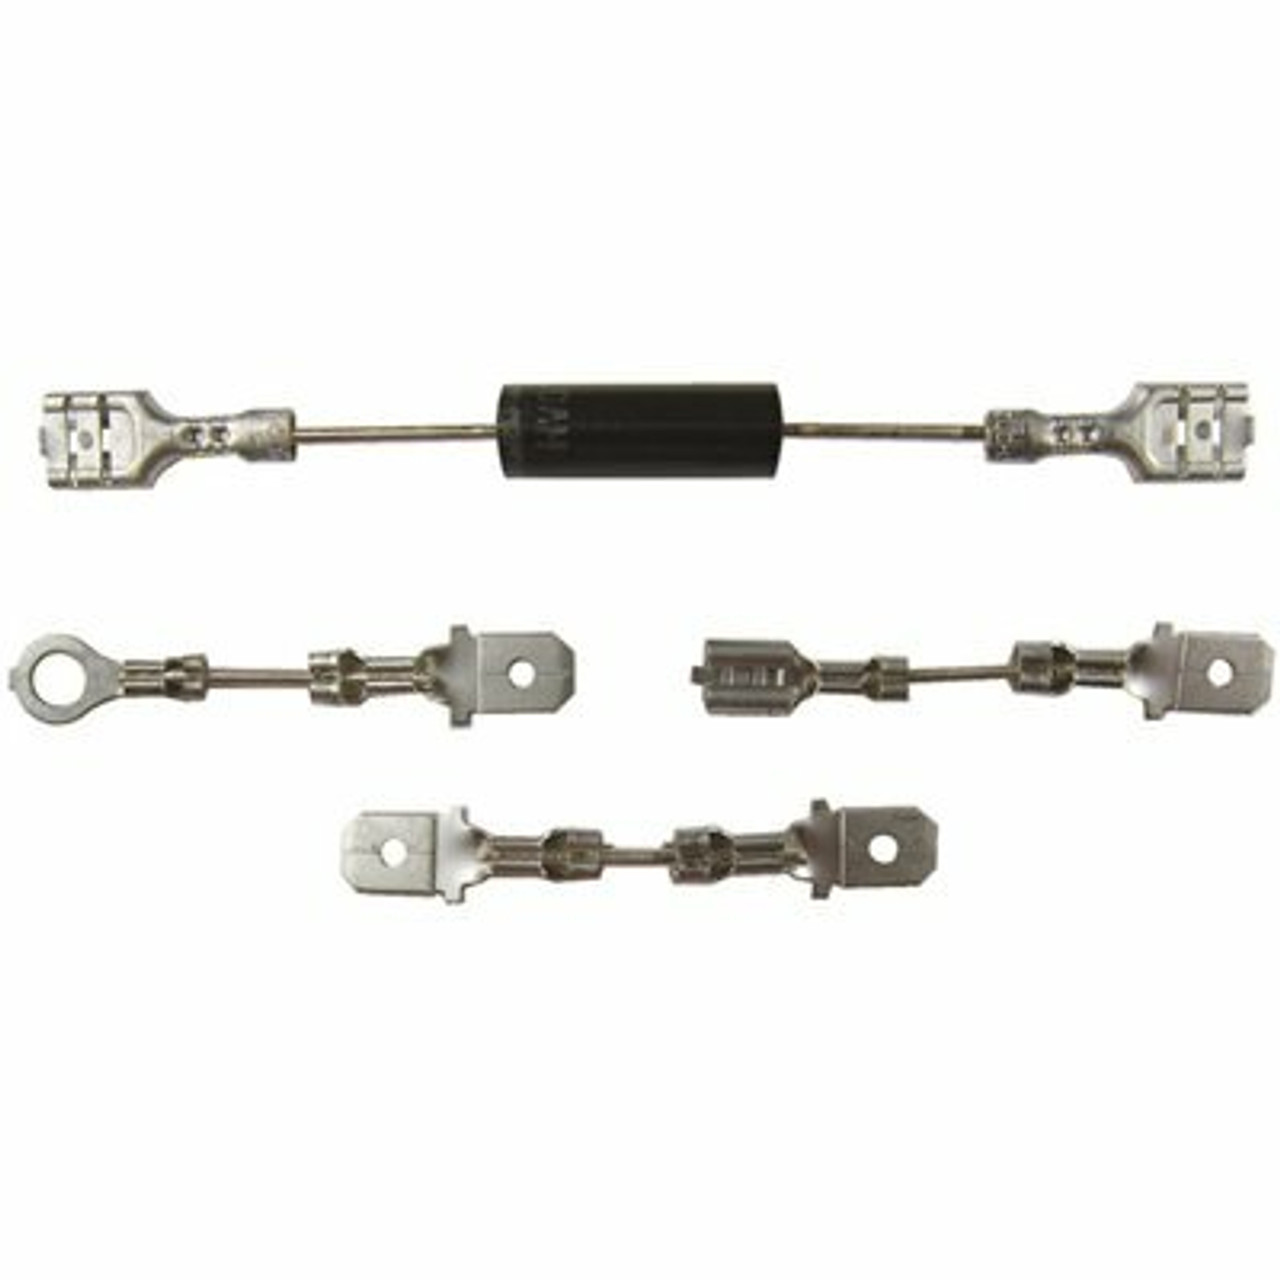 Exact Replacement Parts Universal Diode Kit Using Two 1/4 In. Female Quick Disconnect Terminal Adapters